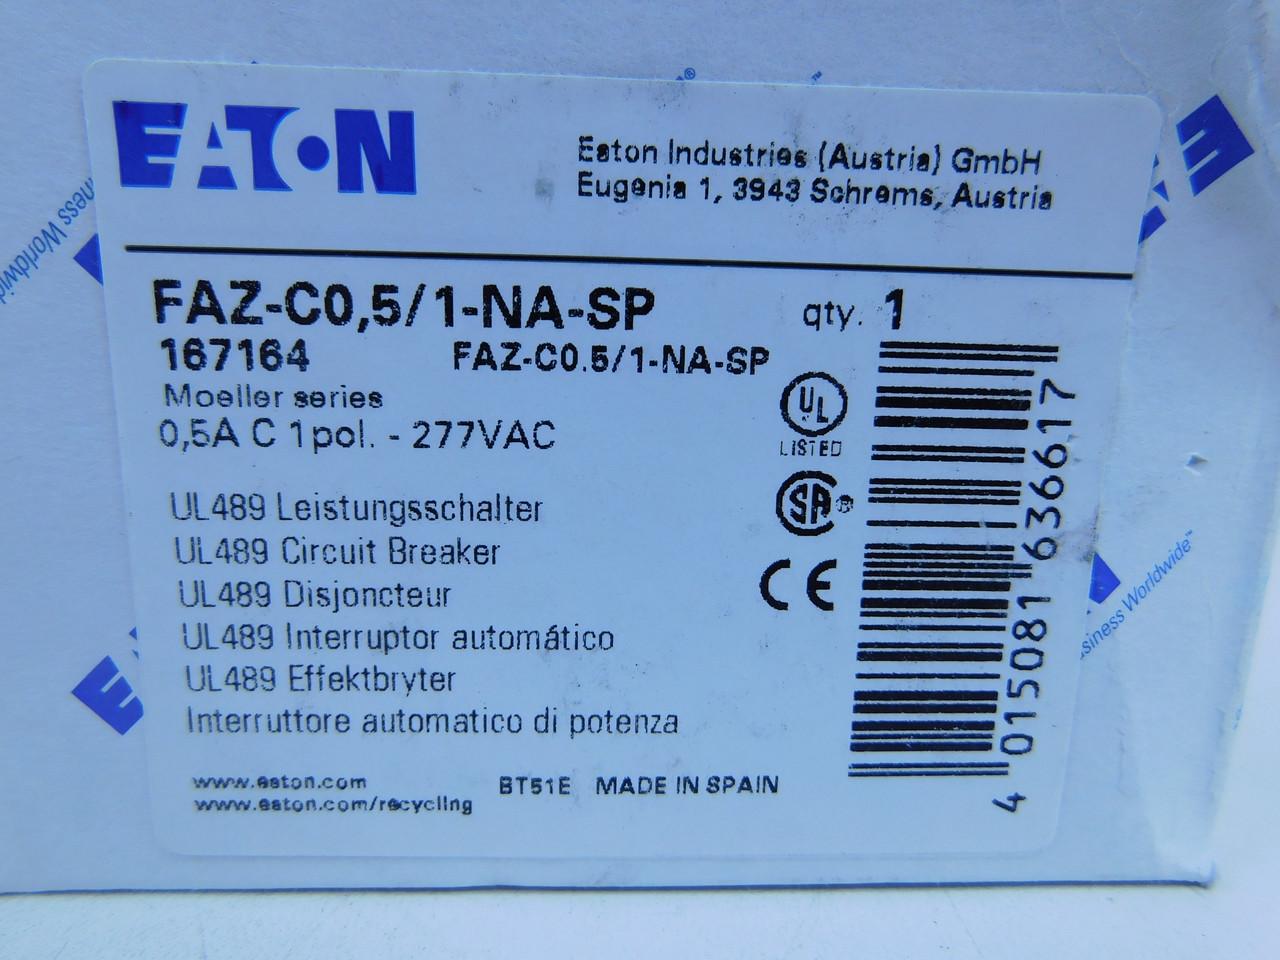 Eaton FAZ-C0.5/1-NA-SP Eaton FAZ branch protector,UL 489 Industrial miniature circuit breaker - supplementary protector,Single package,Medium levels of inrush current are expected,0.5 A,10 kAIC,Single-pole,277 V,5-10X /n,Q38,50-60 Hz,Screw terminals,C Curve